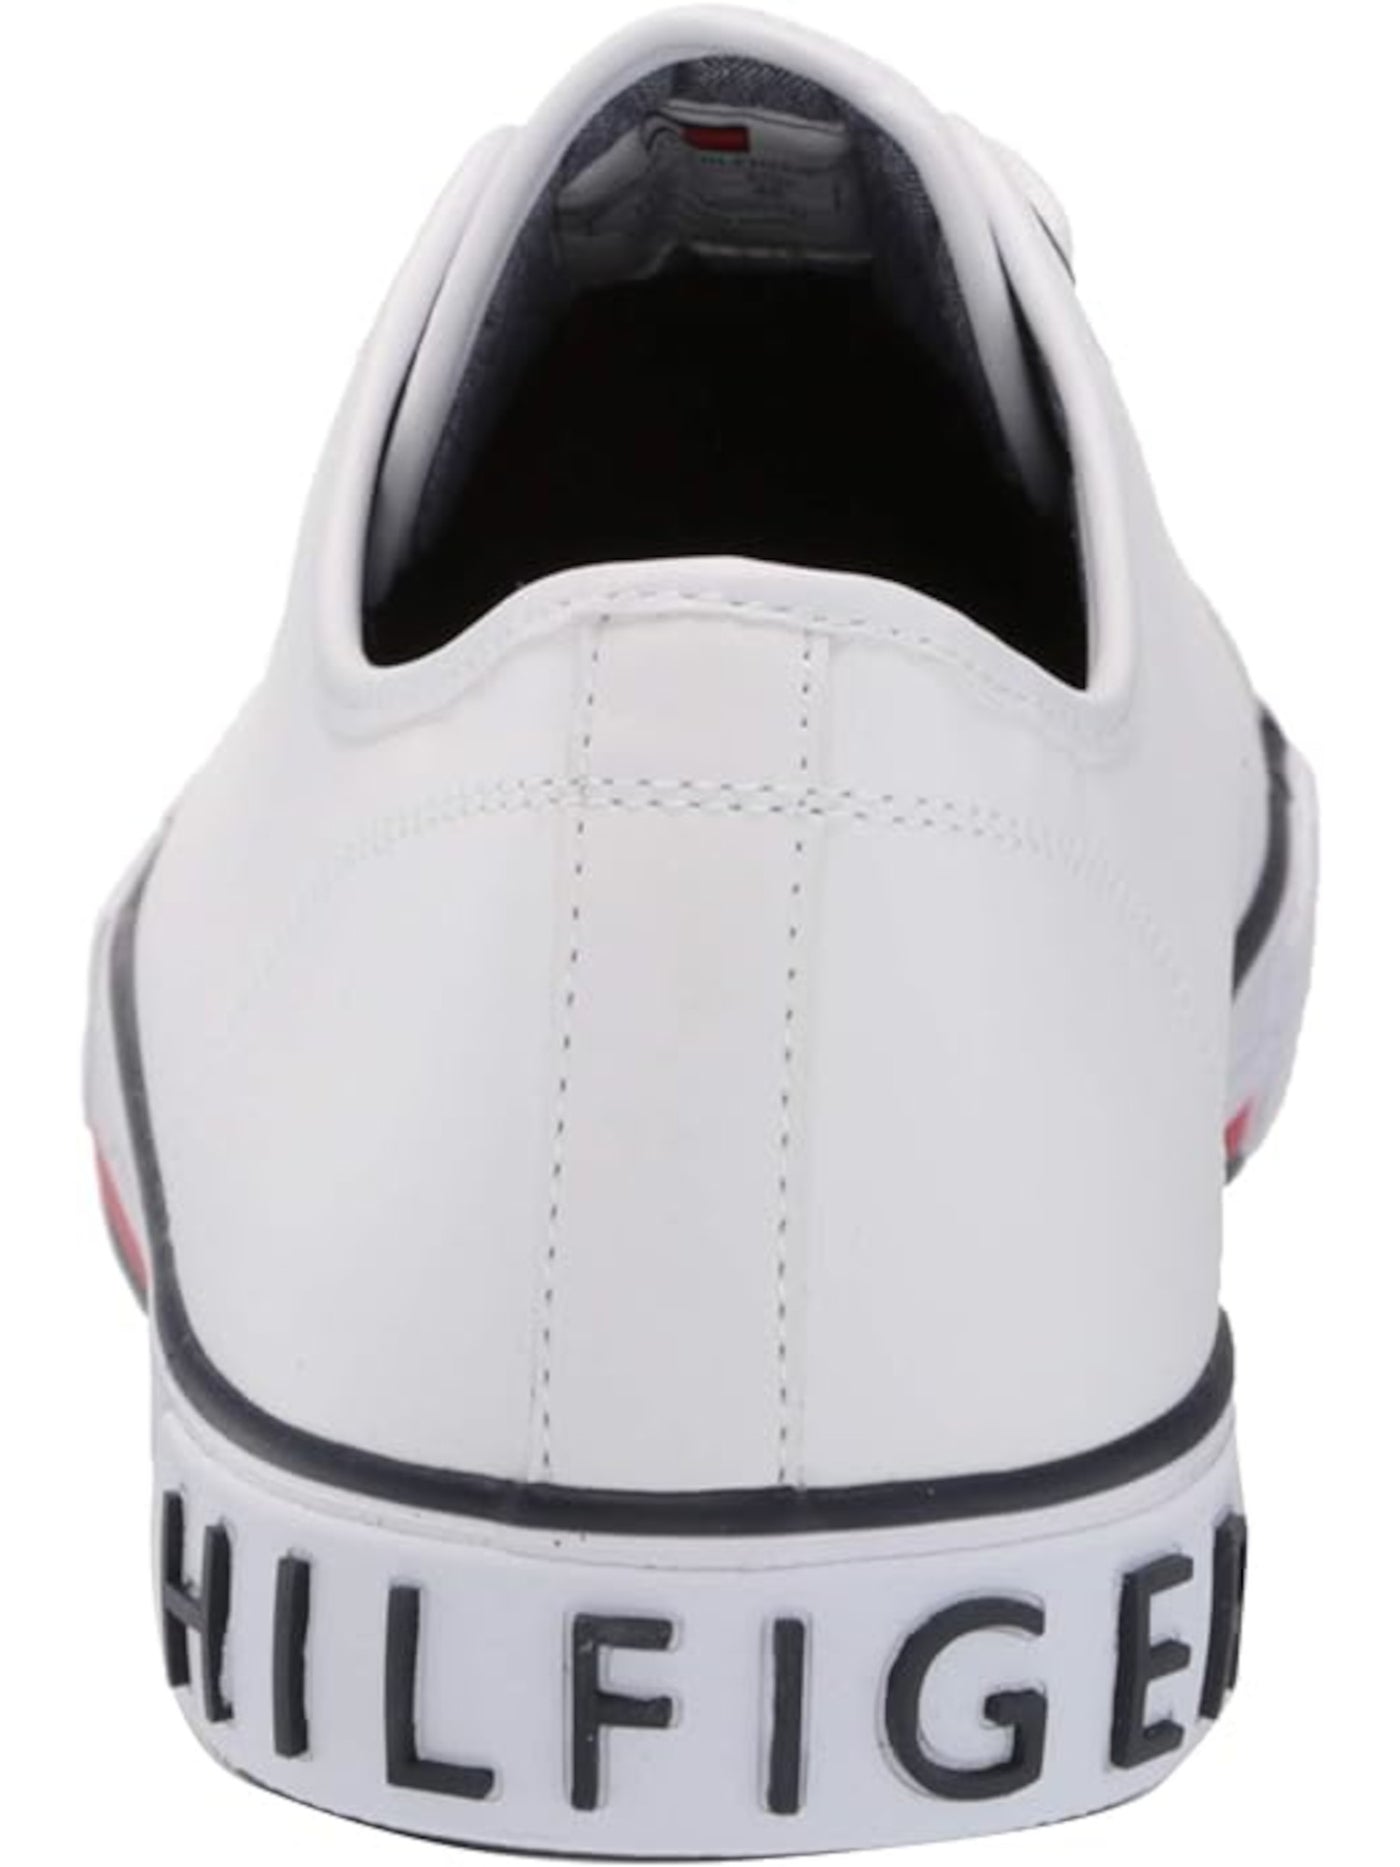 TOMMY HILFIGER Mens White Padded Radam Round Toe Lace-Up Sneakers Shoes 9.5